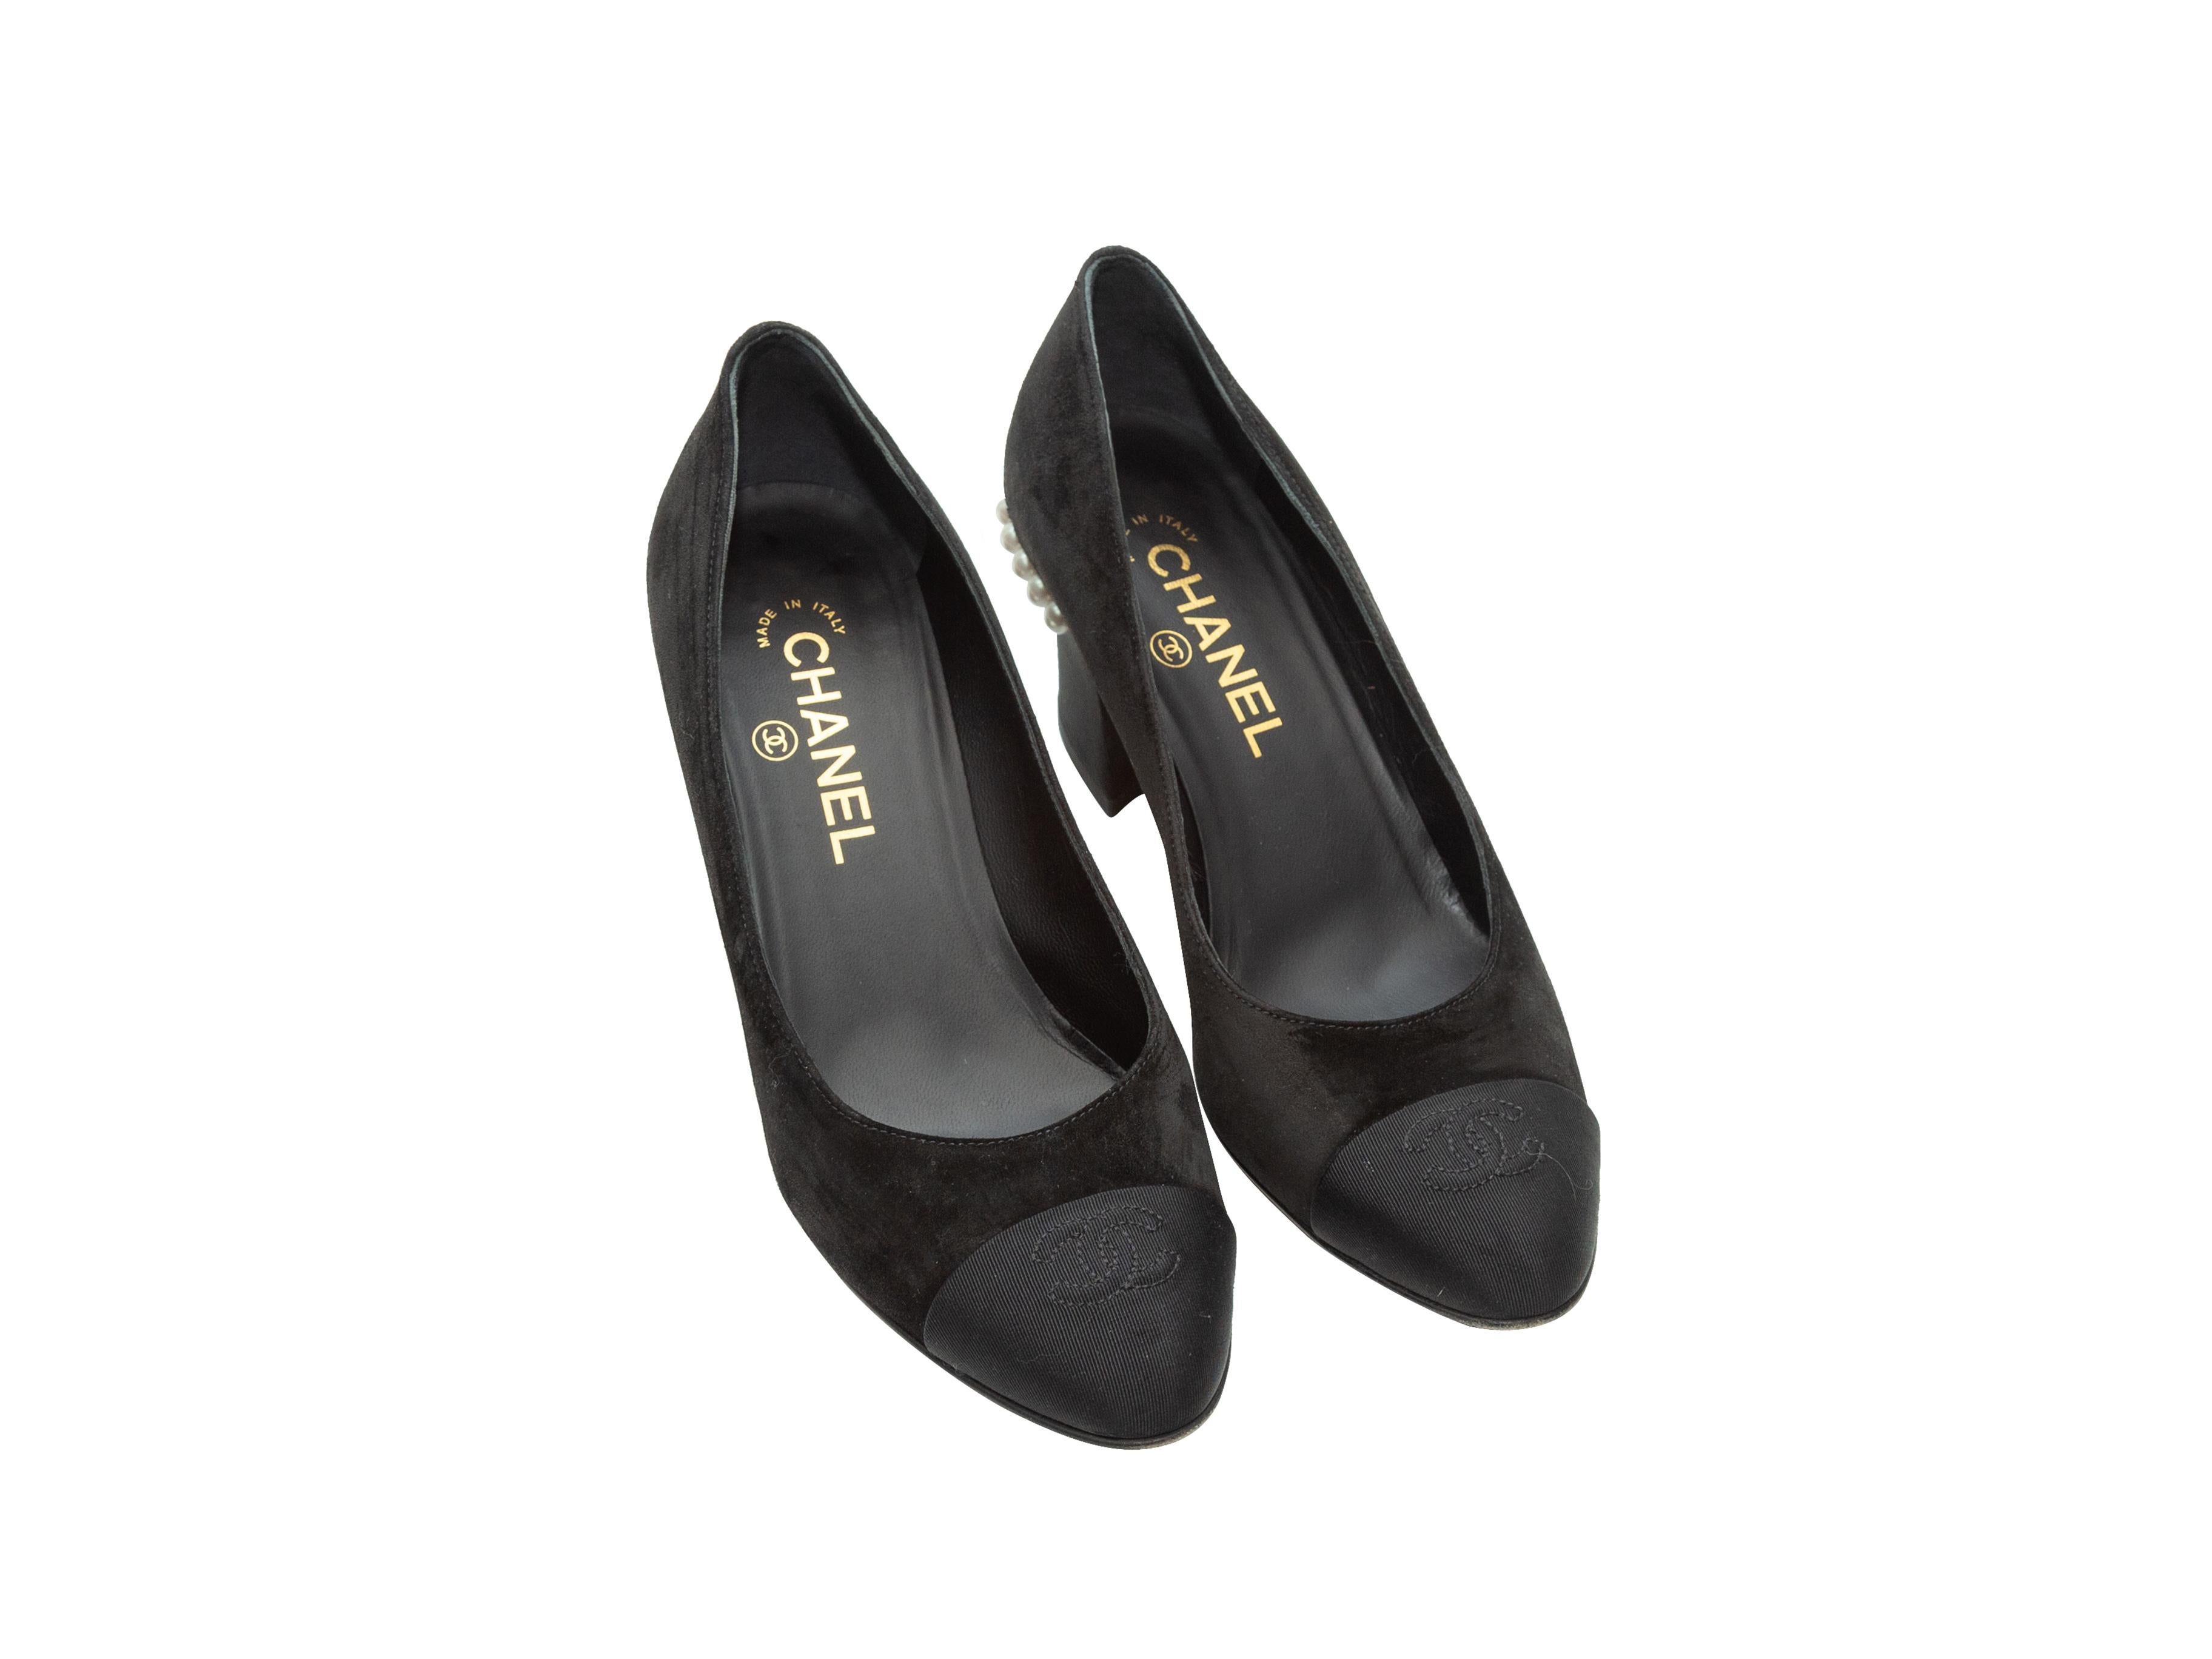 Product details: Black suede round-toe heels by Chanel. Faux pearl accents at covered block heels. Designer size 37. 2.5